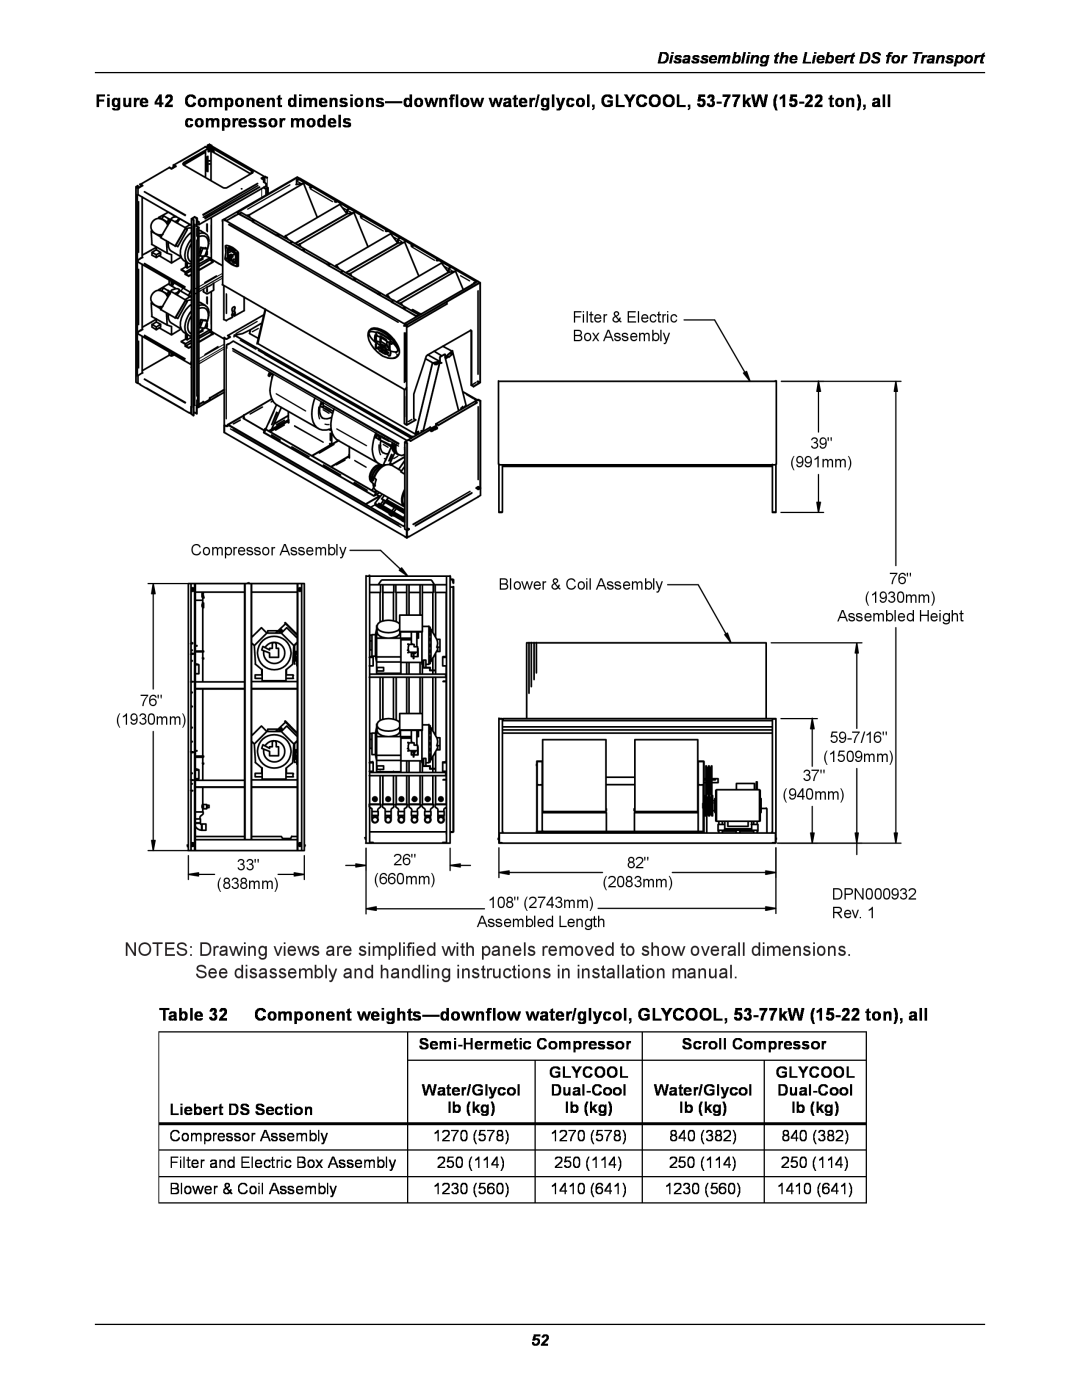 Liebert DS user manual Component dimensions-downflow water/glycol, GLYCOOL, 53-77kW 15-22 ton, all compressor models 